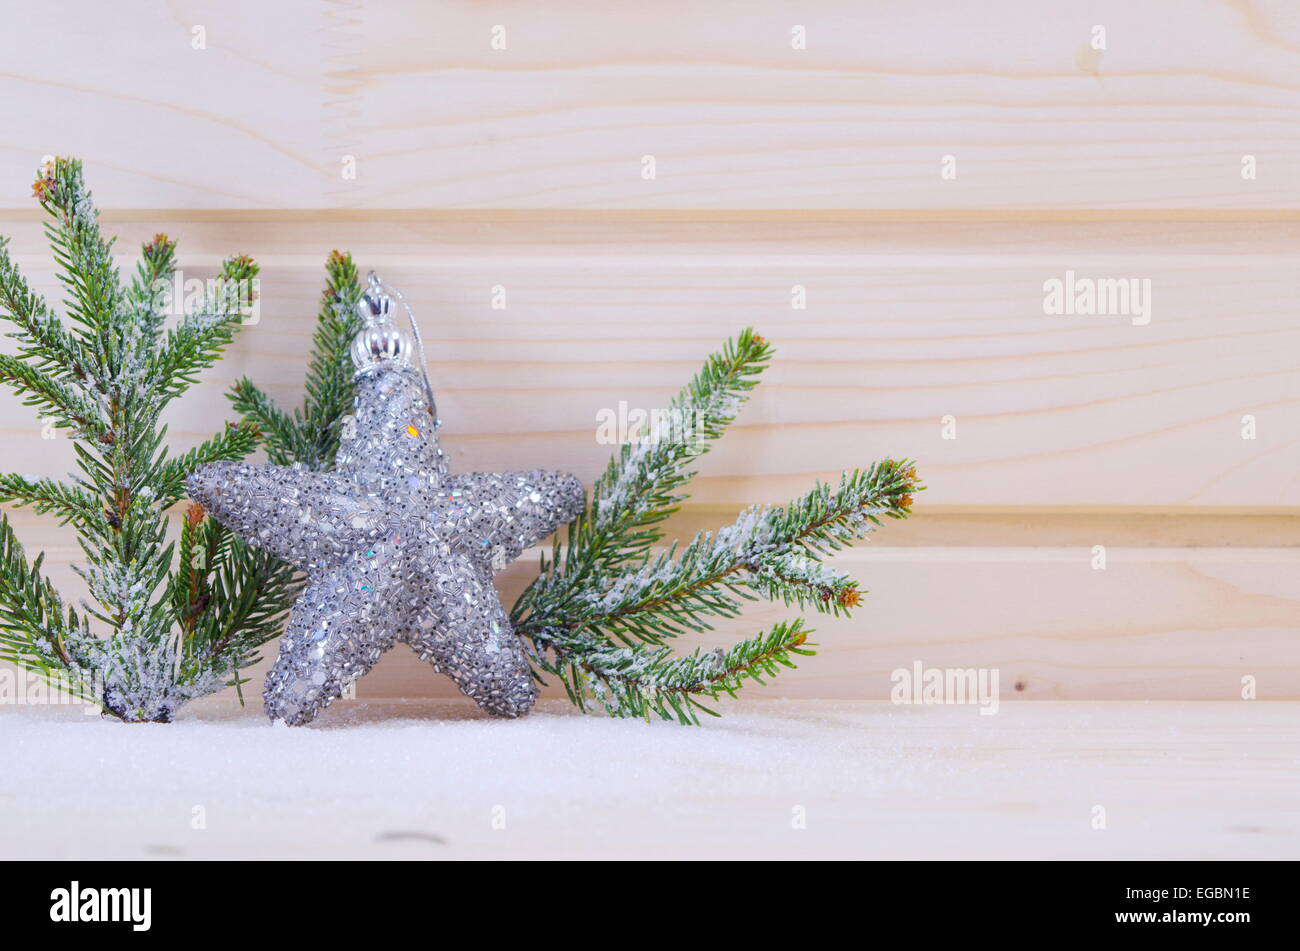 A shiny star ornament with fir branches on a wooden surface covered with snow Stock Photo